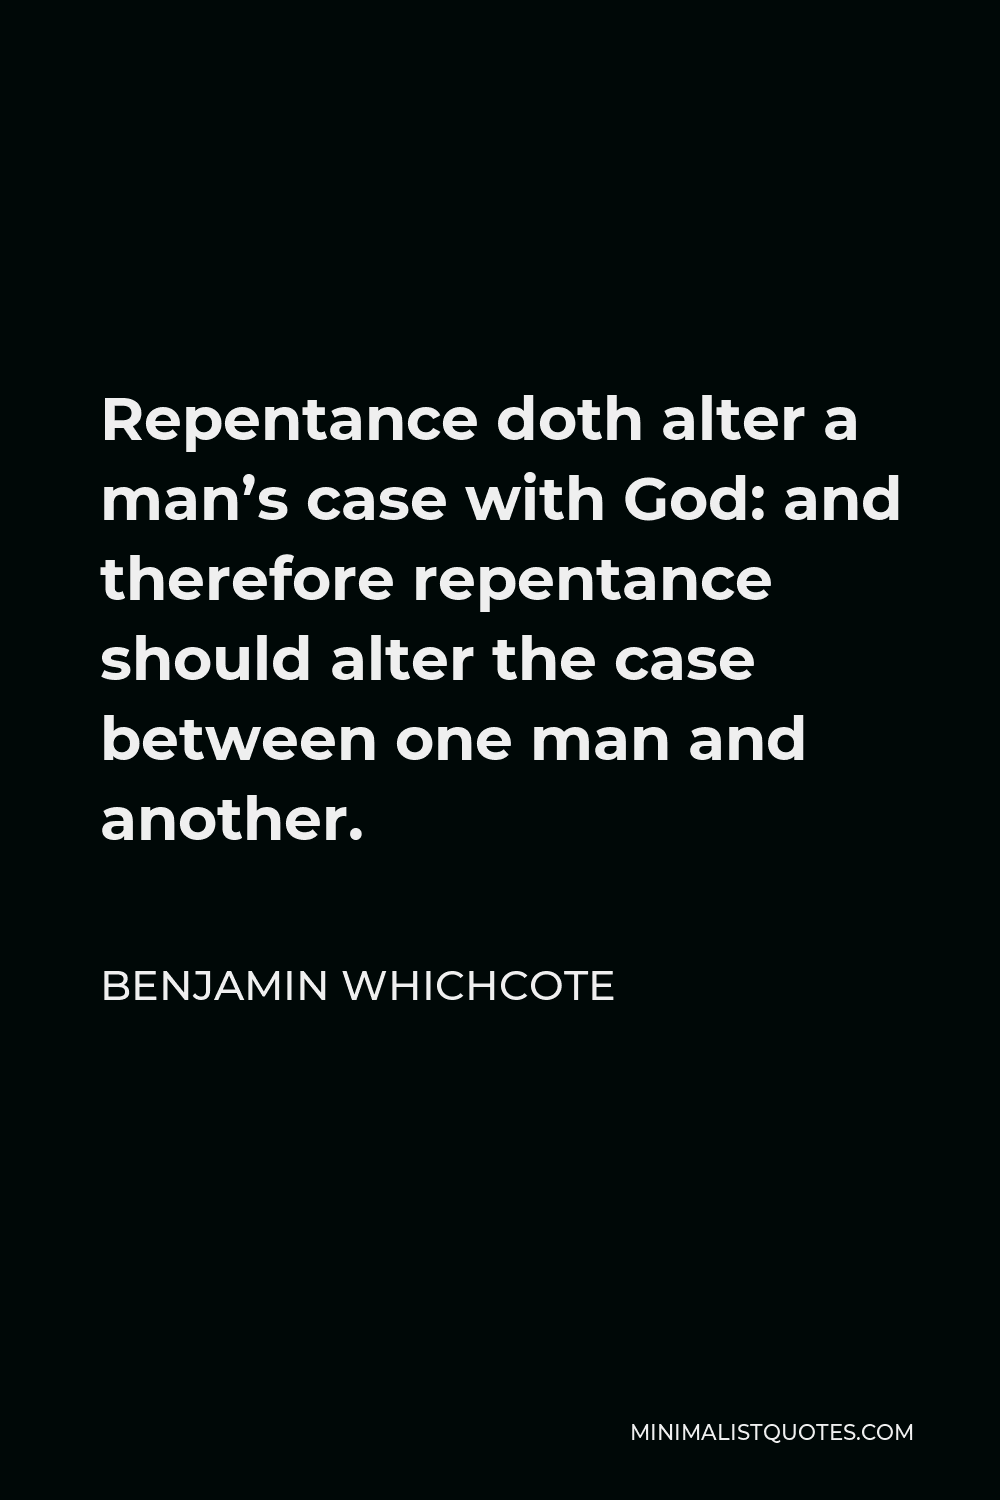 Benjamin Whichcote Quote - Repentance doth alter a man’s case with God: and therefore repentance should alter the case between one man and another.